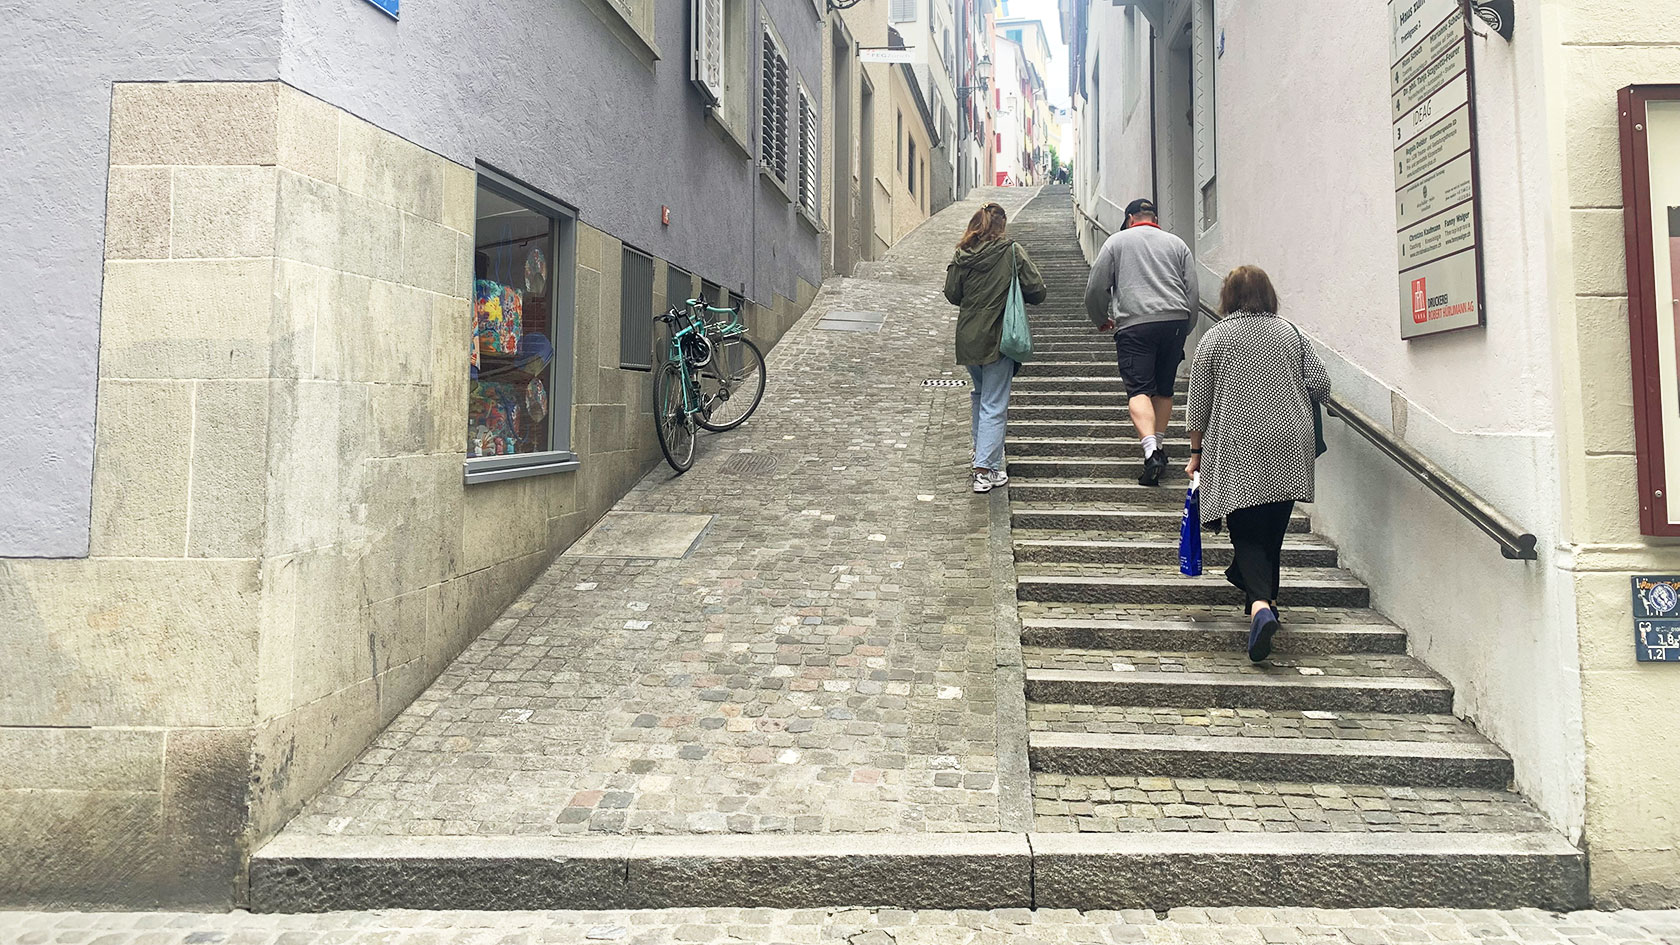 Trittligasse in Zurich: In spite of the ramp, the curb is an obstacle to accessibility.